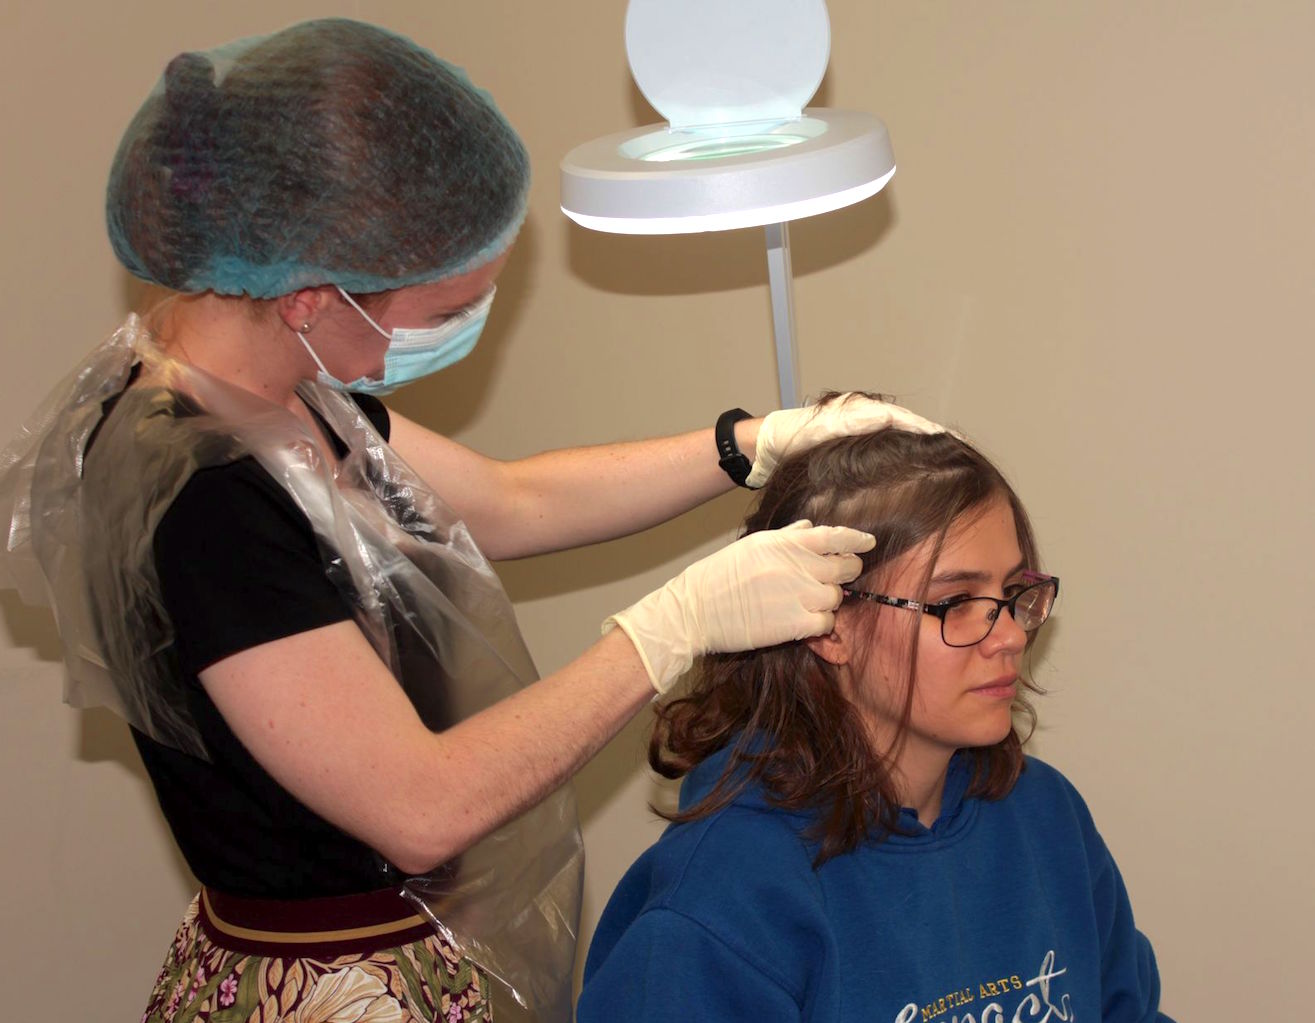 Researchers take fine-tooth comb to find natural solution to head lice